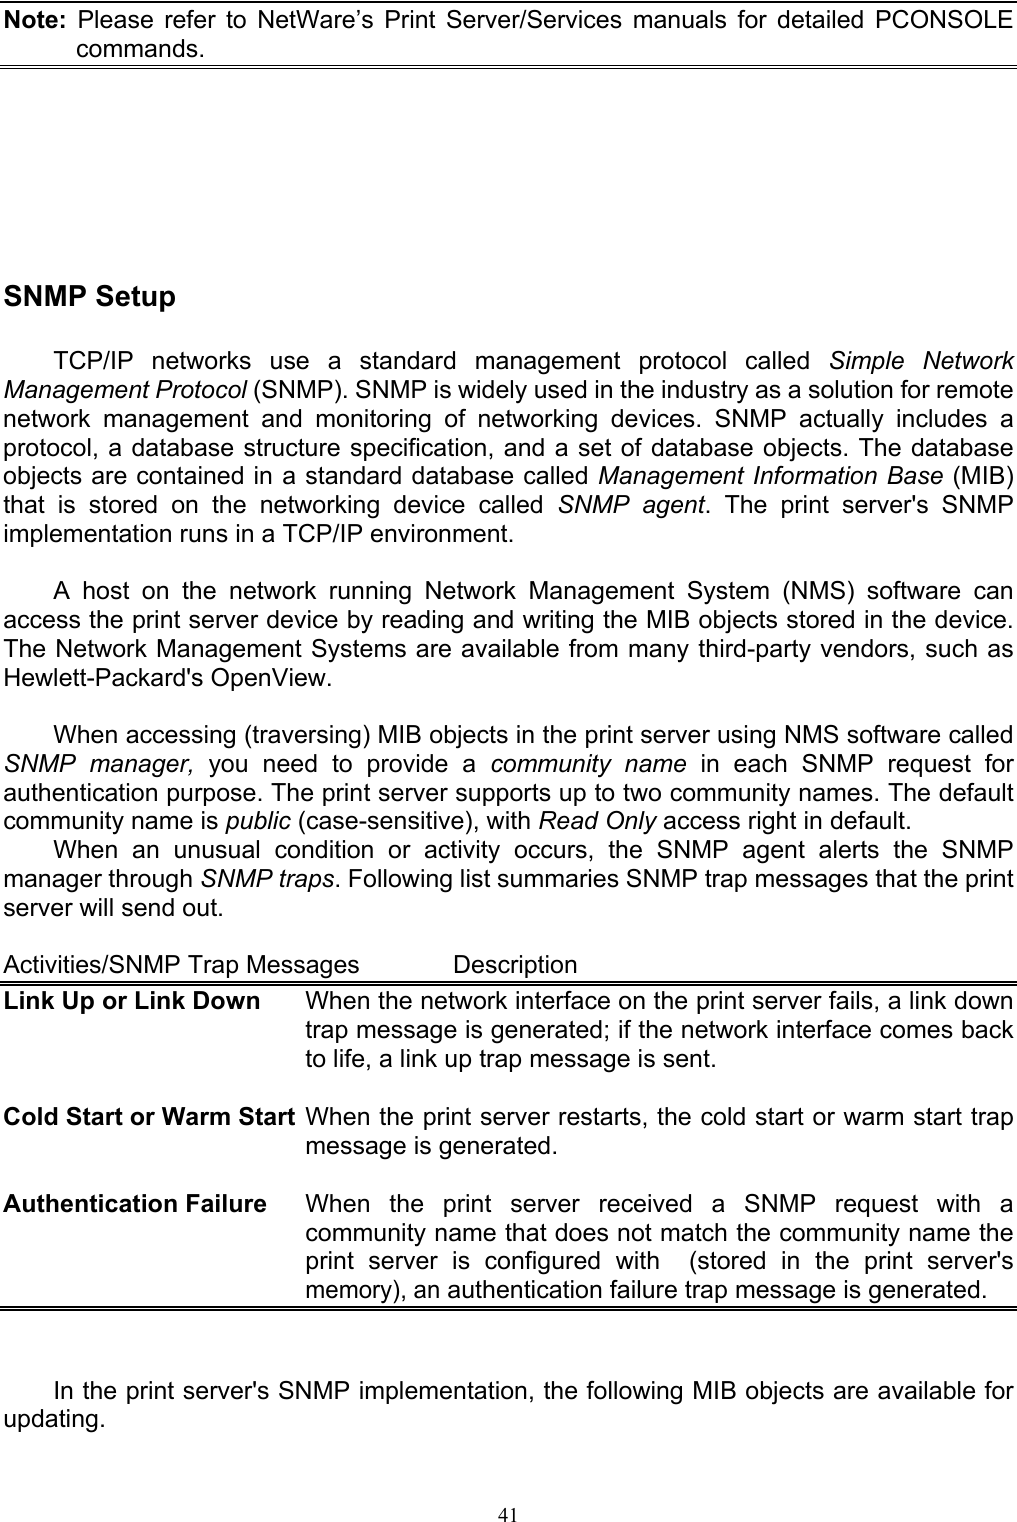                                                                                             41  Note: Please refer to NetWare’s Print Server/Services manuals for detailed PCONSOLE commands.      SNMP Setup  TCP/IP networks use a standard management protocol called Simple Network Management Protocol (SNMP). SNMP is widely used in the industry as a solution for remote network management and monitoring of networking devices. SNMP actually includes a protocol, a database structure specification, and a set of database objects. The database objects are contained in a standard database called Management Information Base (MIB) that is stored on the networking device called SNMP agent. The print server&apos;s SNMP implementation runs in a TCP/IP environment.  A host on the network running Network Management System (NMS) software can access the print server device by reading and writing the MIB objects stored in the device. The Network Management Systems are available from many third-party vendors, such as Hewlett-Packard&apos;s OpenView.  When accessing (traversing) MIB objects in the print server using NMS software called SNMP manager, you need to provide a community name in each SNMP request for authentication purpose. The print server supports up to two community names. The default community name is public (case-sensitive), with Read Only access right in default. When an unusual condition or activity occurs, the SNMP agent alerts the SNMP manager through SNMP traps. Following list summaries SNMP trap messages that the print server will send out.  Activities/SNMP Trap Messages    Description Link Up or Link Down  When the network interface on the print server fails, a link down trap message is generated; if the network interface comes back to life, a link up trap message is sent.  Cold Start or Warm Start When the print server restarts, the cold start or warm start trap message is generated.  Authentication Failure  When the print server received a SNMP request with a community name that does not match the community name the print server is configured with  (stored in the print server&apos;s memory), an authentication failure trap message is generated.   In the print server&apos;s SNMP implementation, the following MIB objects are available for updating. 